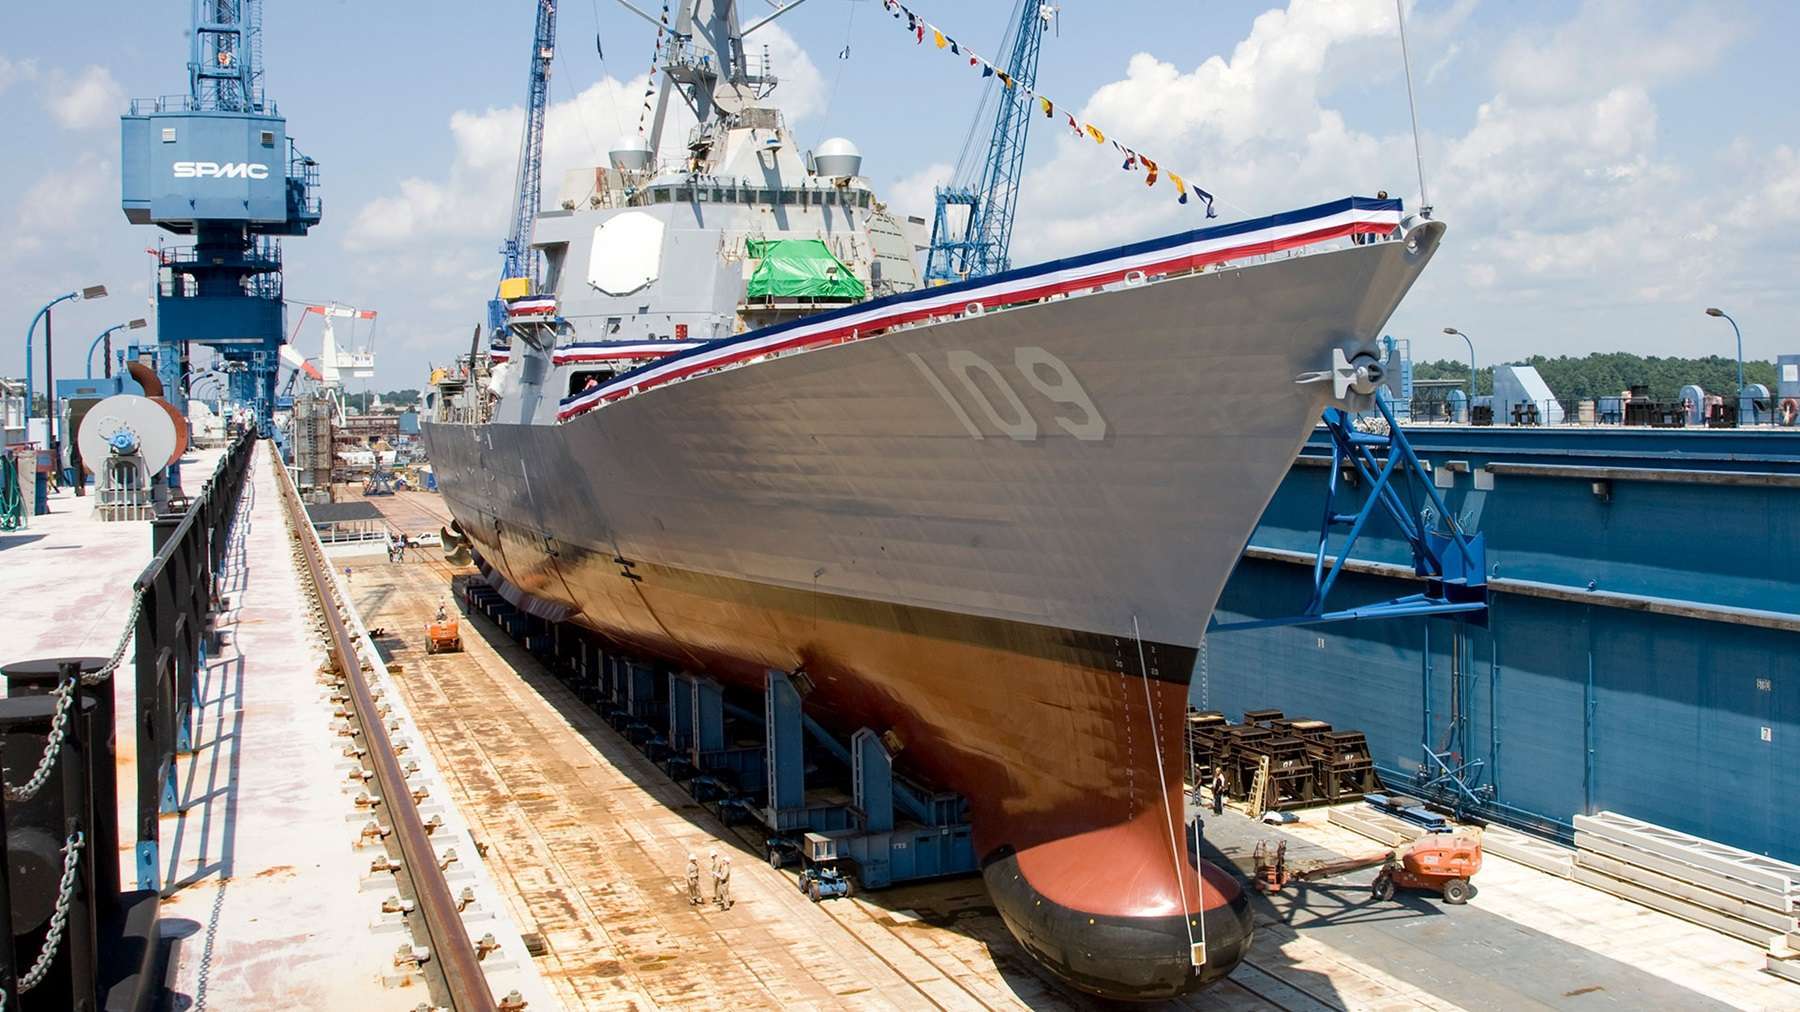 The Naval Programs group within Aerostructures at Collins Aerospace has supplied more than 25 composite keel domes and 360 rubber bow windows for U.S. Navy surface ships.